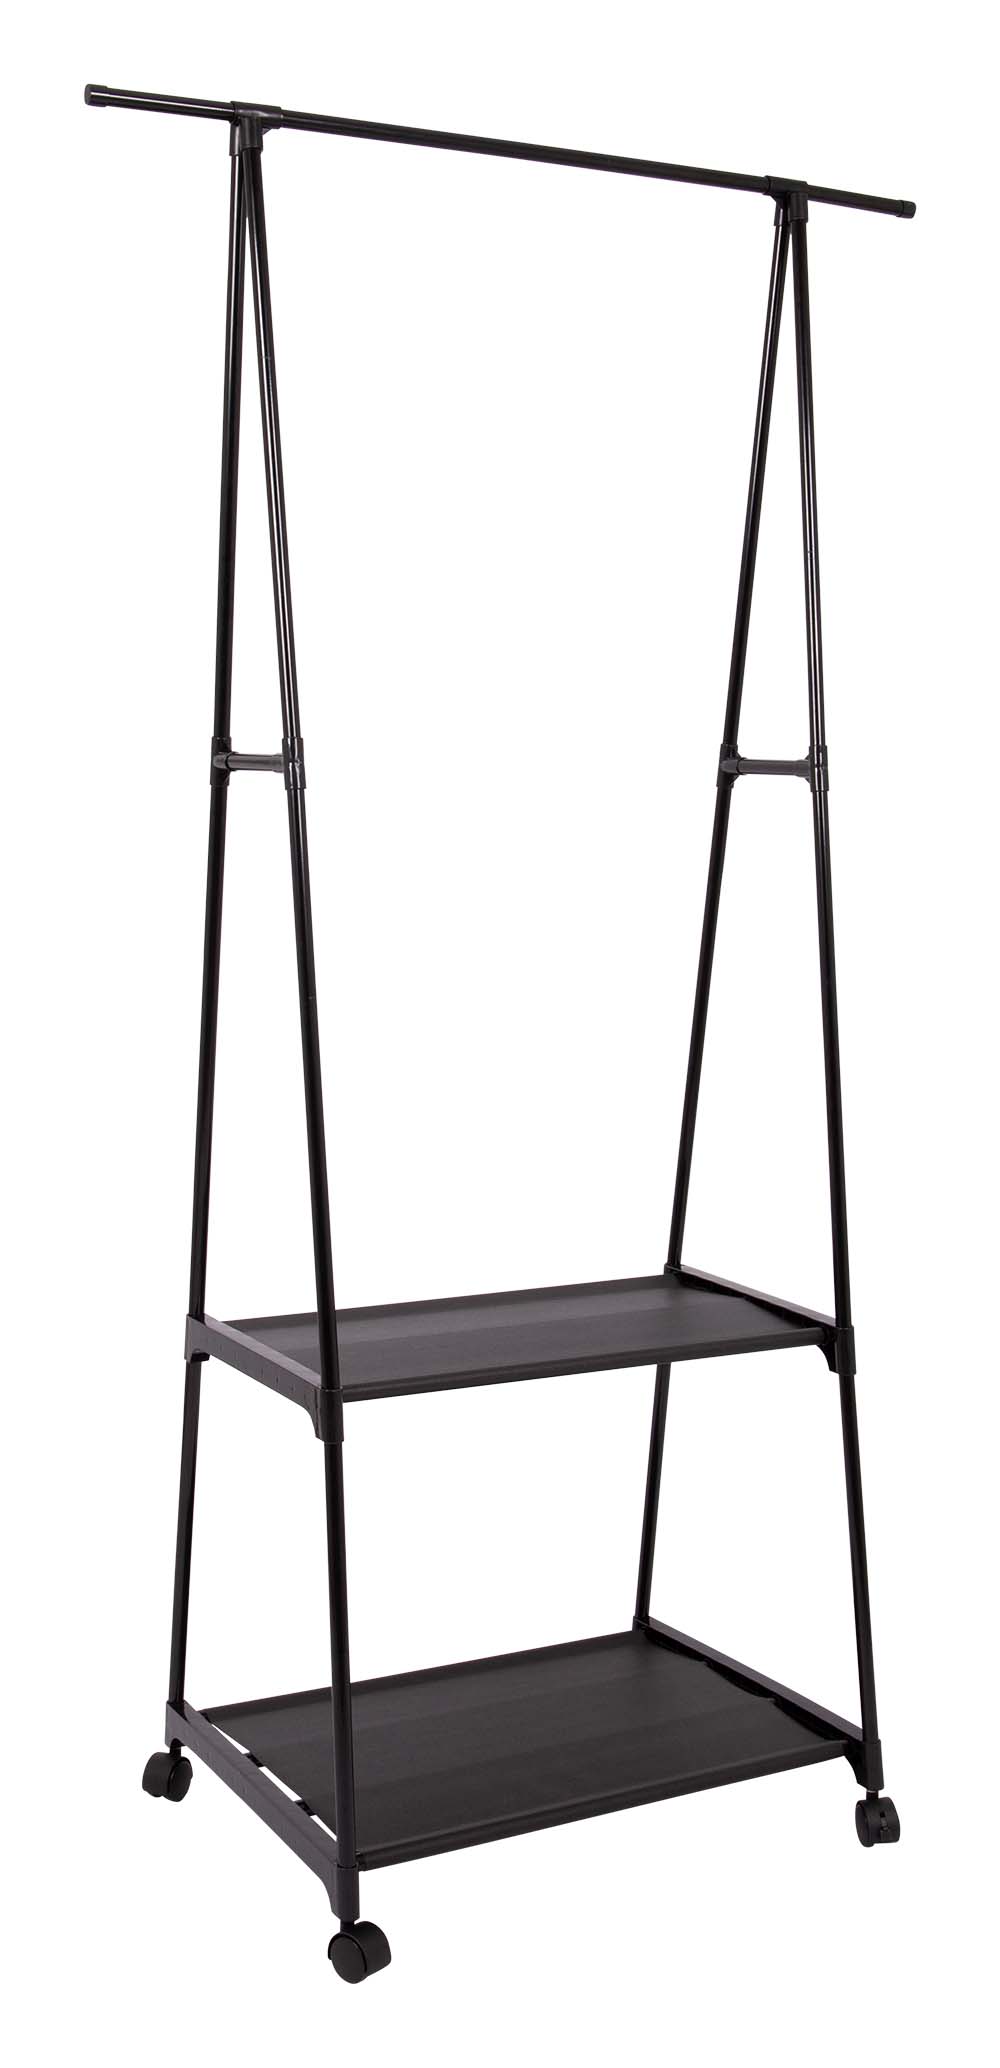 1694030 A lightweight black steel clothing rack. Easy to move around due to the wheels at the bottom. It also comes with 2 shelves for storing shoes, for example. The clothing rack is compact and easy to take with you. Ideal for camping or home use.